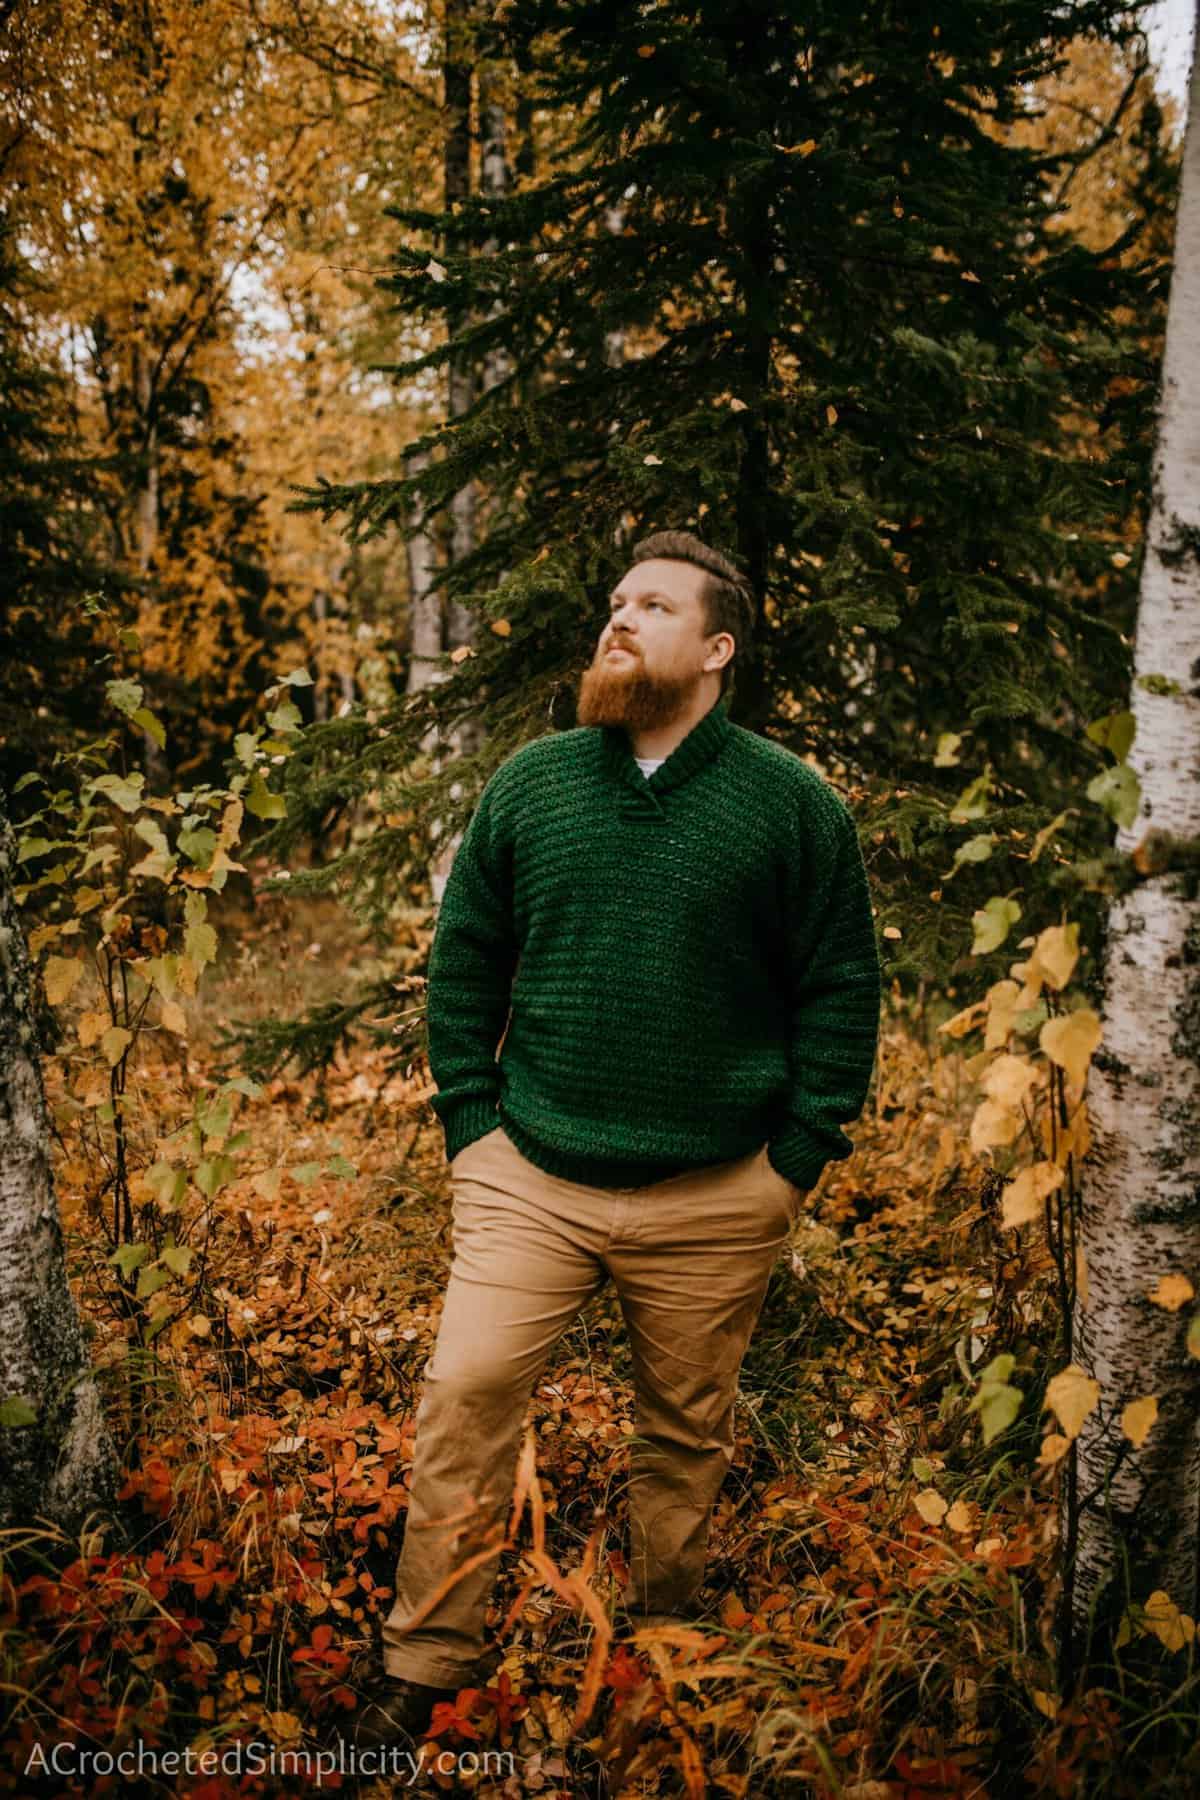 Free Crochet Sweater Pattern - Brentwood Men's Pullover by A Crocheted Simplicity #freecrochetpattern #freecrochetsweaterpattern #crochetmenssweater #crochetshawlcollarsweater #crochetmenssweater #crochetsweaterpattern #menssweater #crochetformen